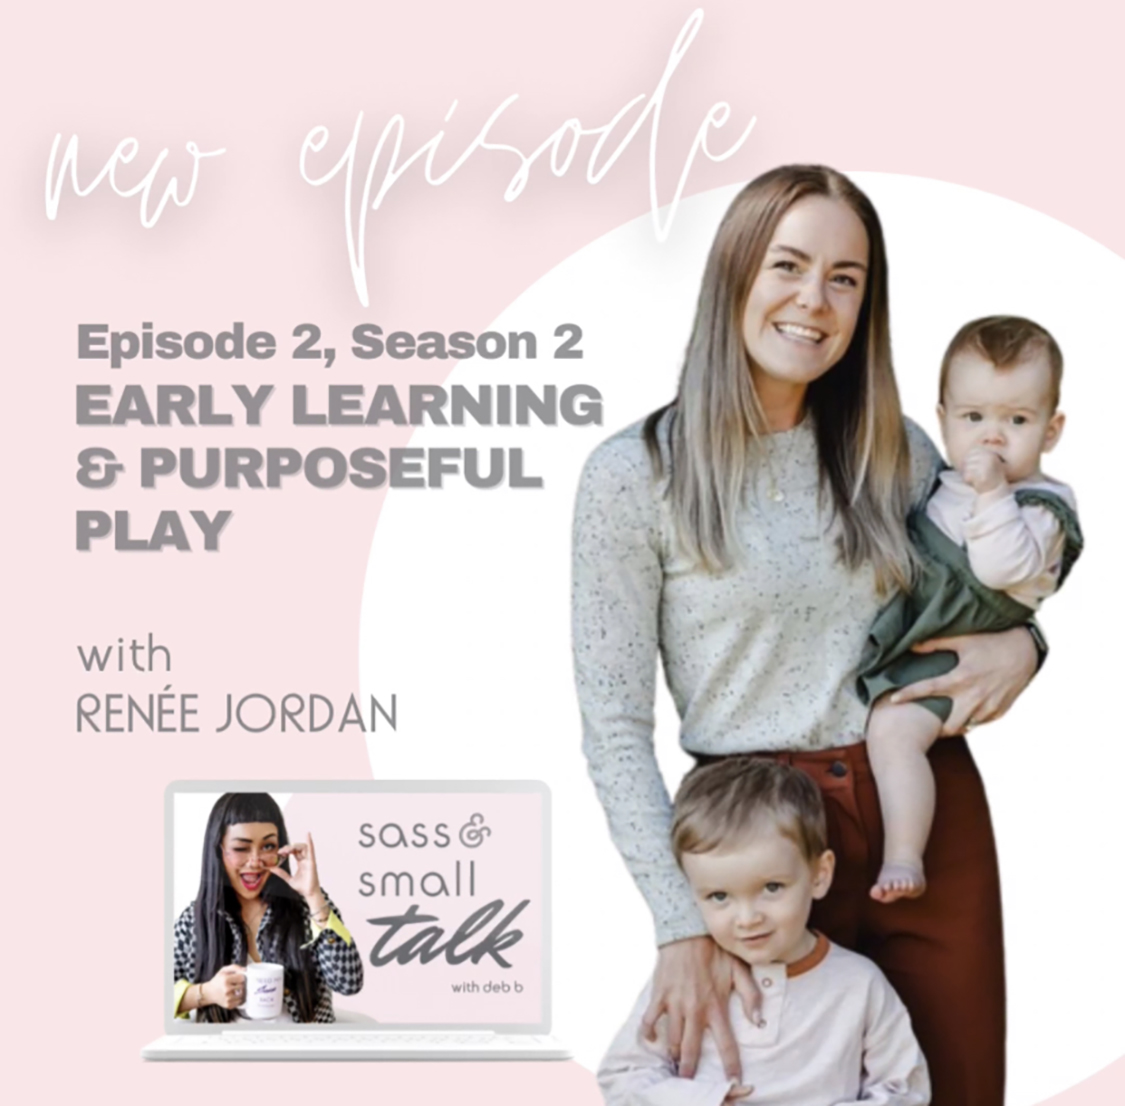 EARLY LEARNING AND PURPOSEFUL PLAY EARLY BIRD www.sassandsmalls.com Episode 2 Season 2